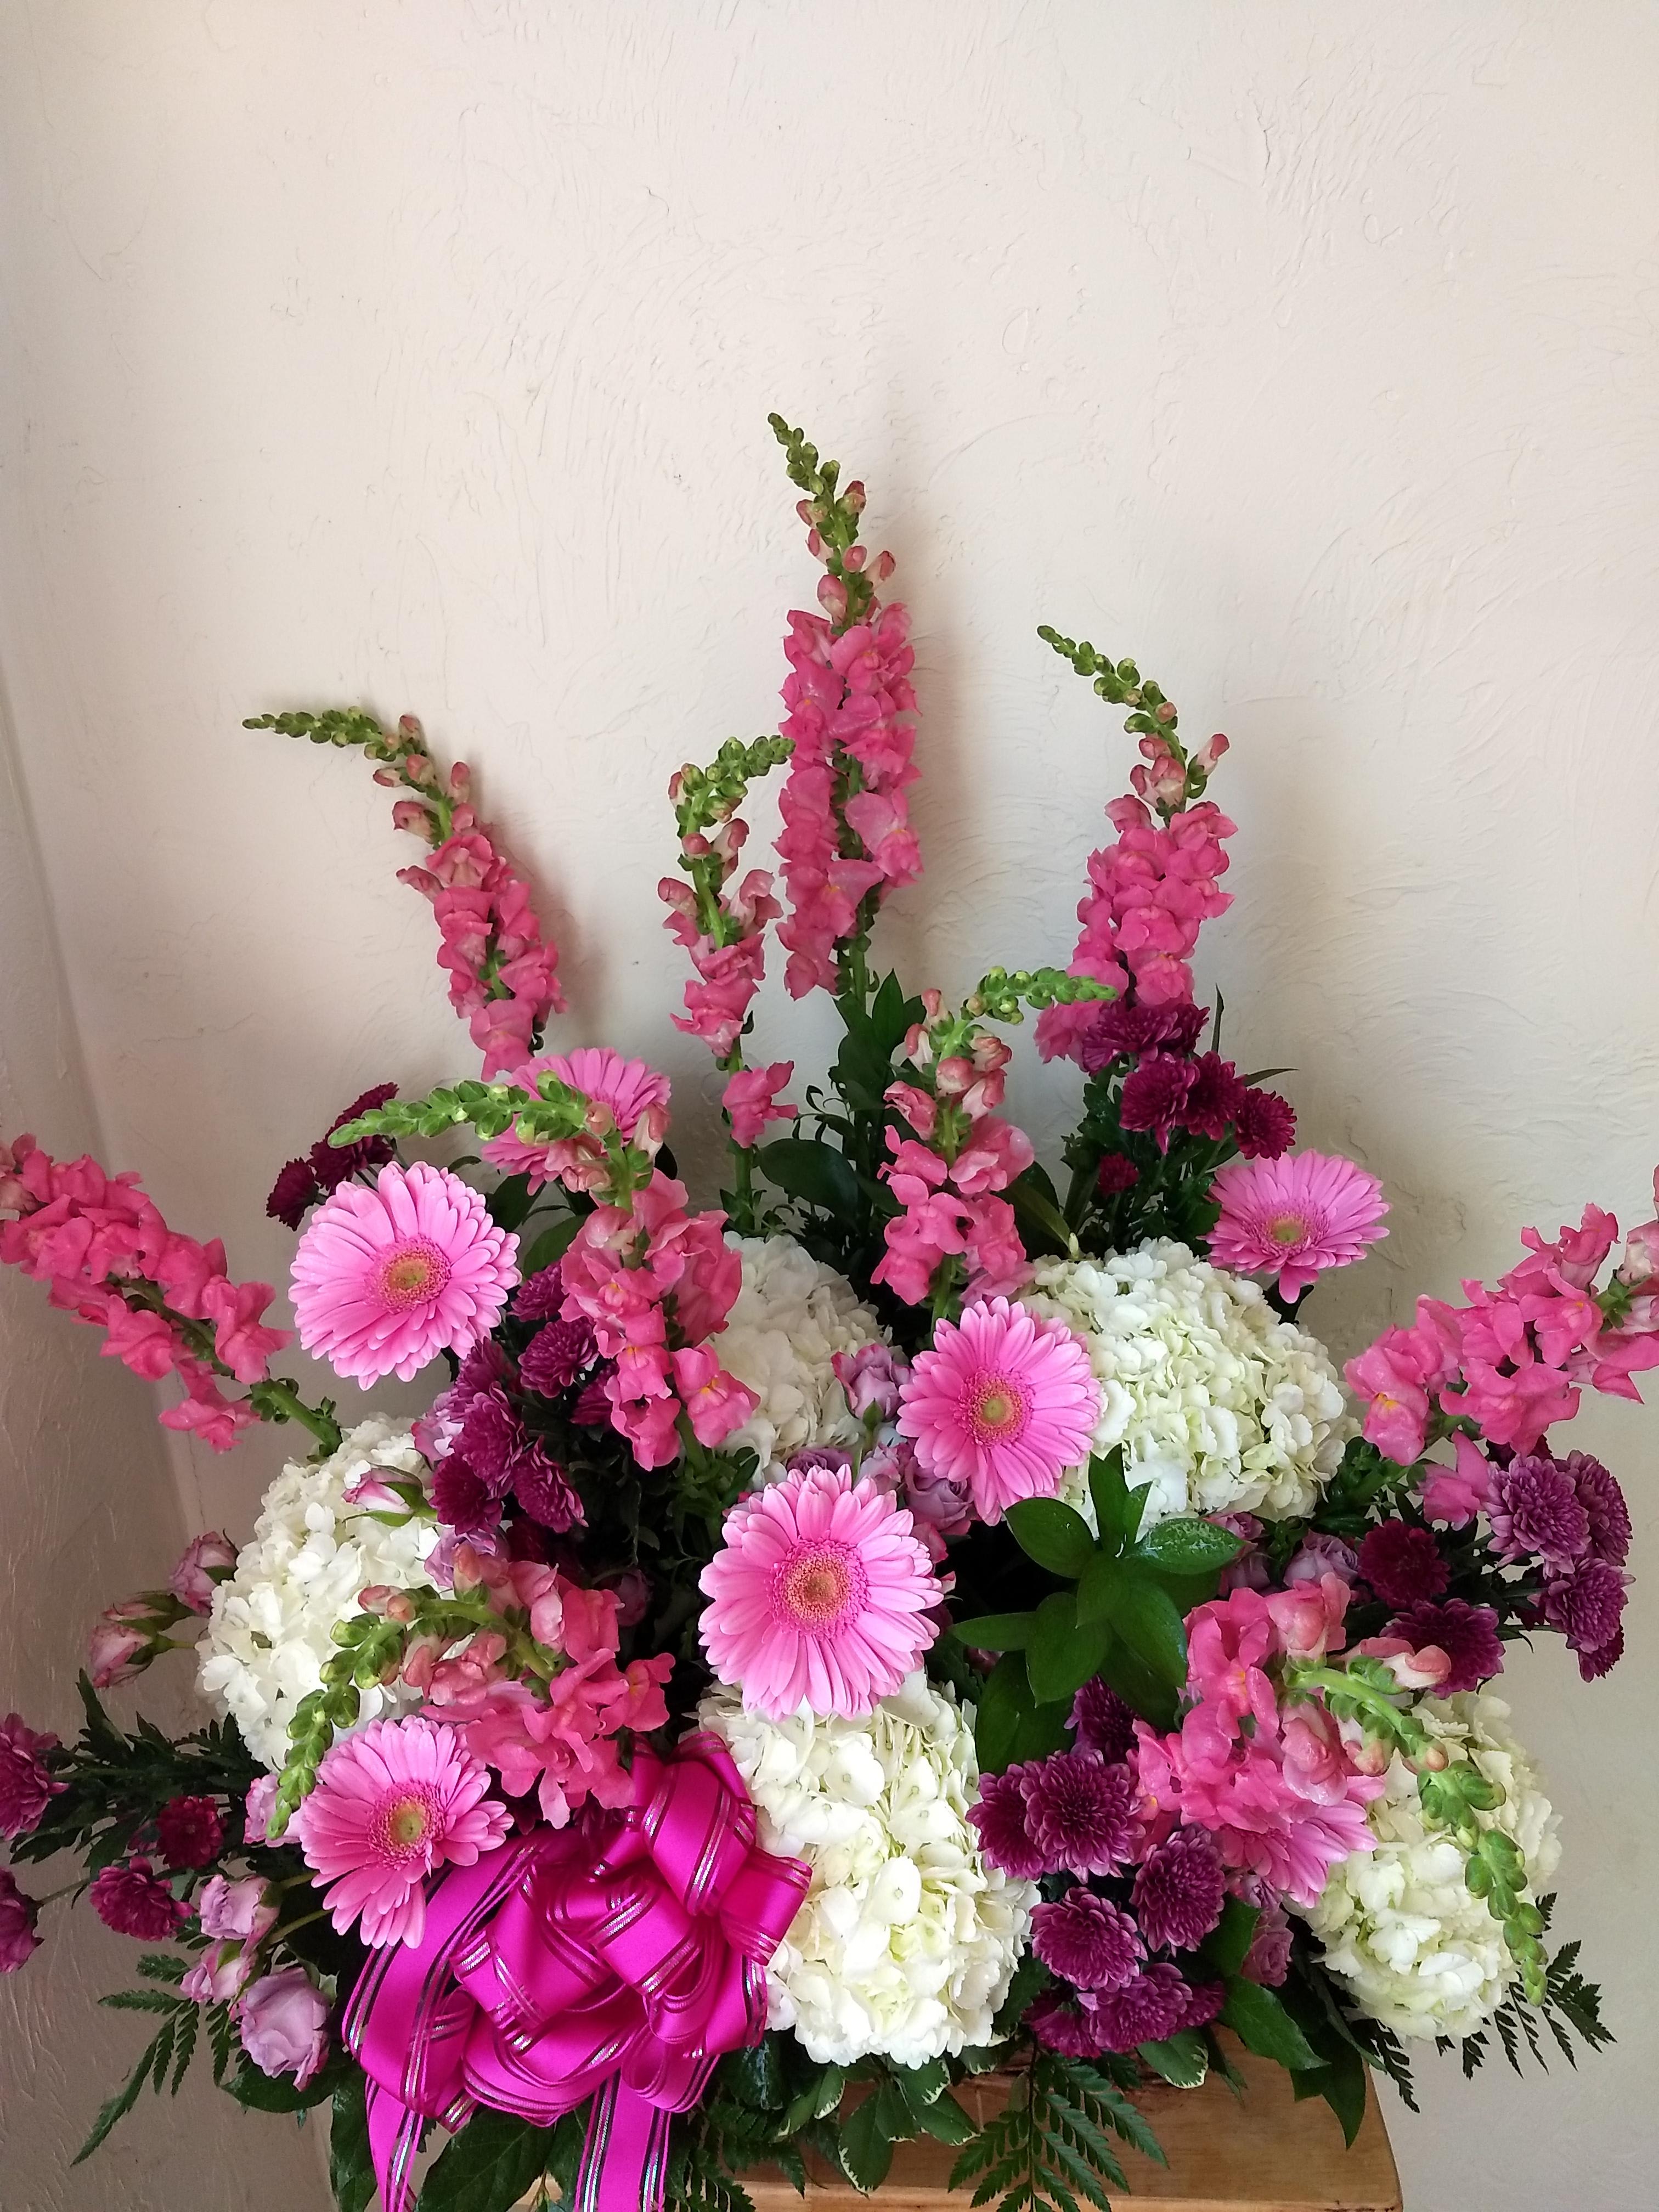 Pastel Grace - Pastel Flower Sympathy Arrangement in Basket  Basket with hydrangea, gerbera, spray oses, snapdragon and poms  **** Please note: 48 hour notice MAYBE REQUIRED We custom-design this arrangement using best-of-day seasonal flowers. This image is a general representation of its size and style and may not feature the exact flowers shown. Due to disruptions in the global supply chain and staff shortages, we may have to make last minute substitutions to your selected design. If we need to make significant changes we will call you first to get your approval*** Thank you for understanding.